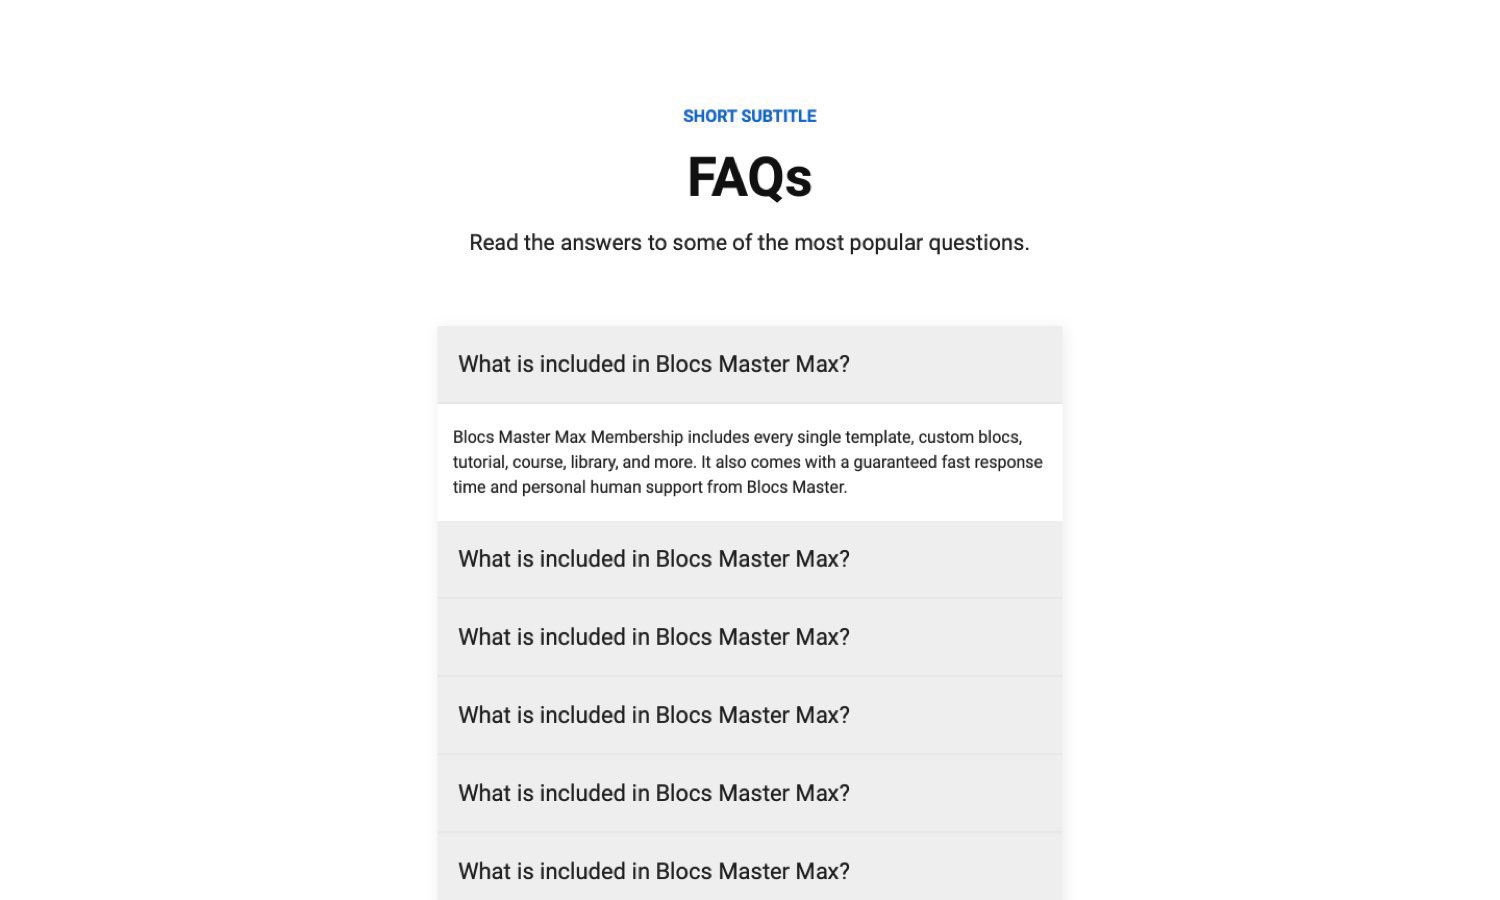 faq frequently asked questions section design